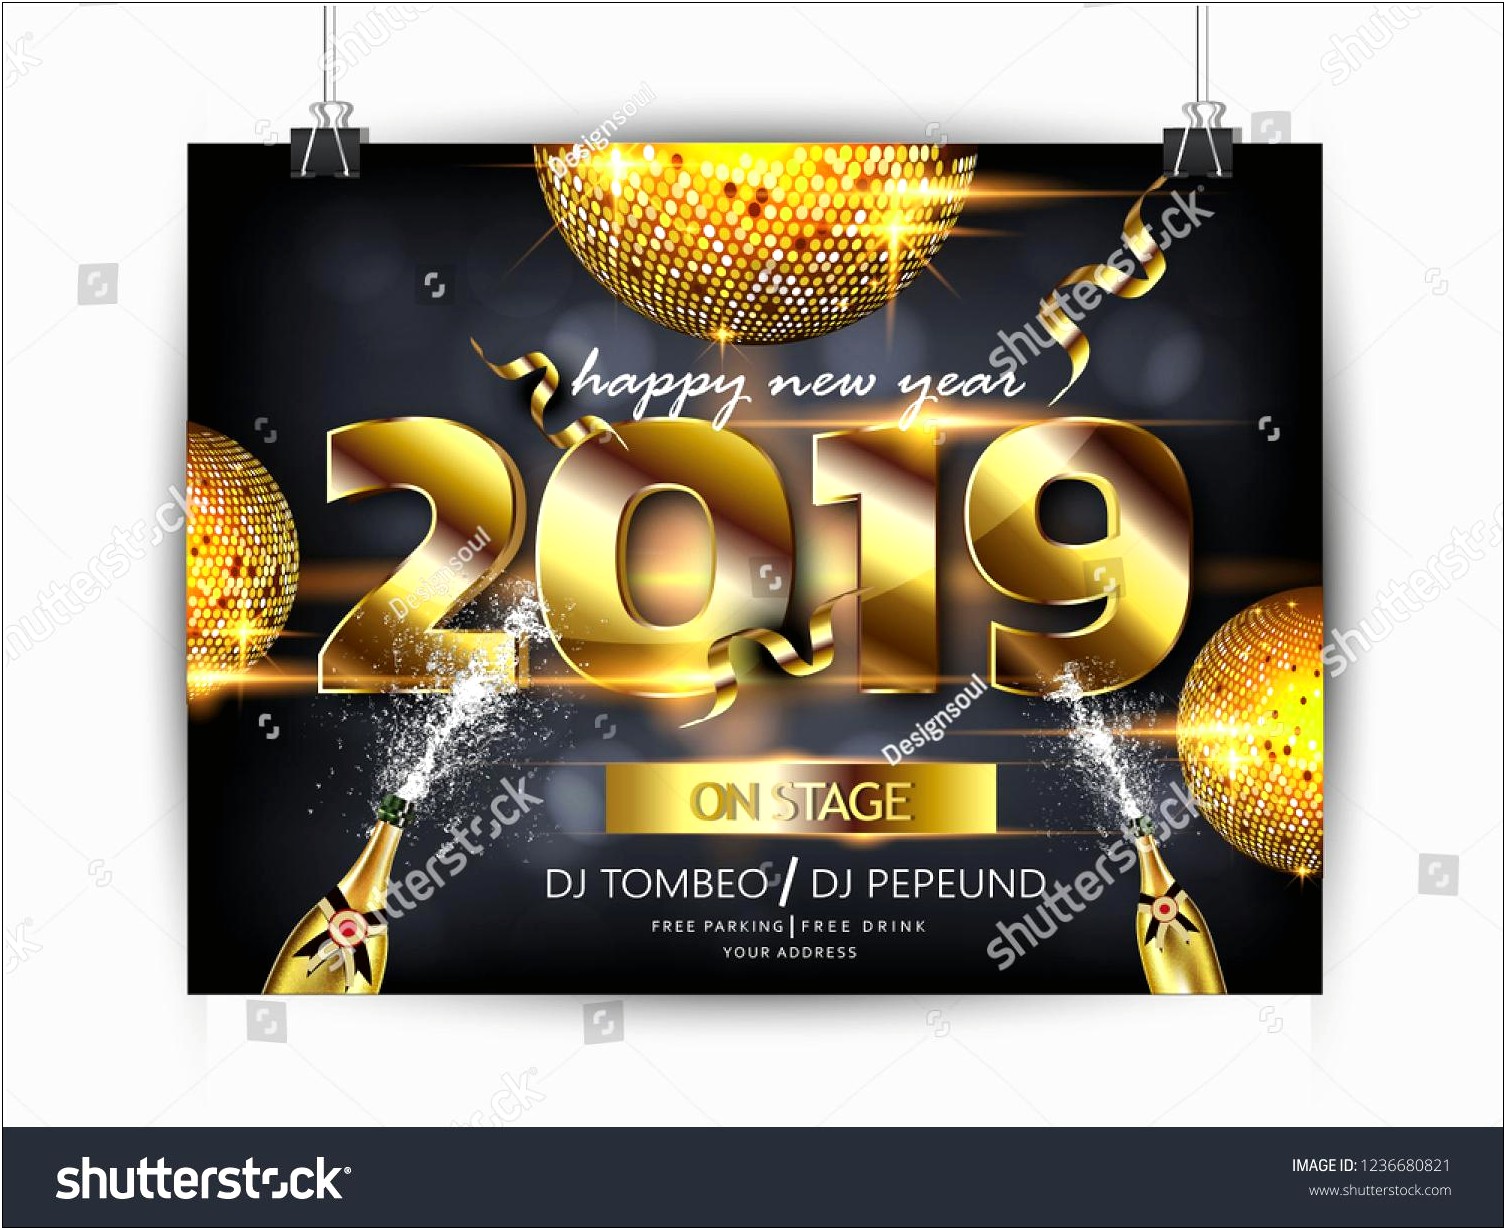 Free New Year Party Invitation Card Template